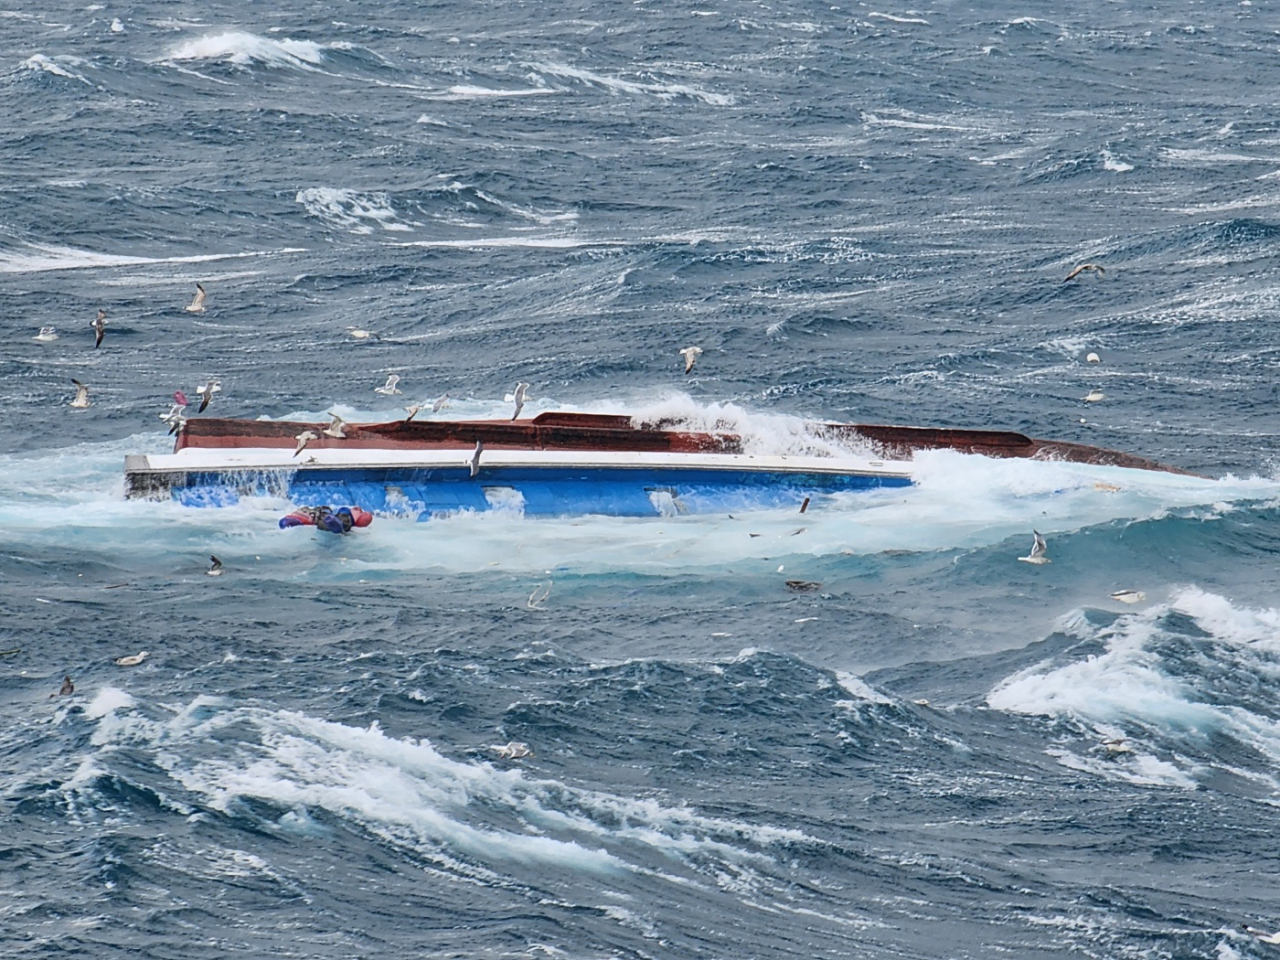 This image provided by the Coast Guard shows a fishing boat that capsized in waters off the southern island of Jeju on Friday. (Yonhap)